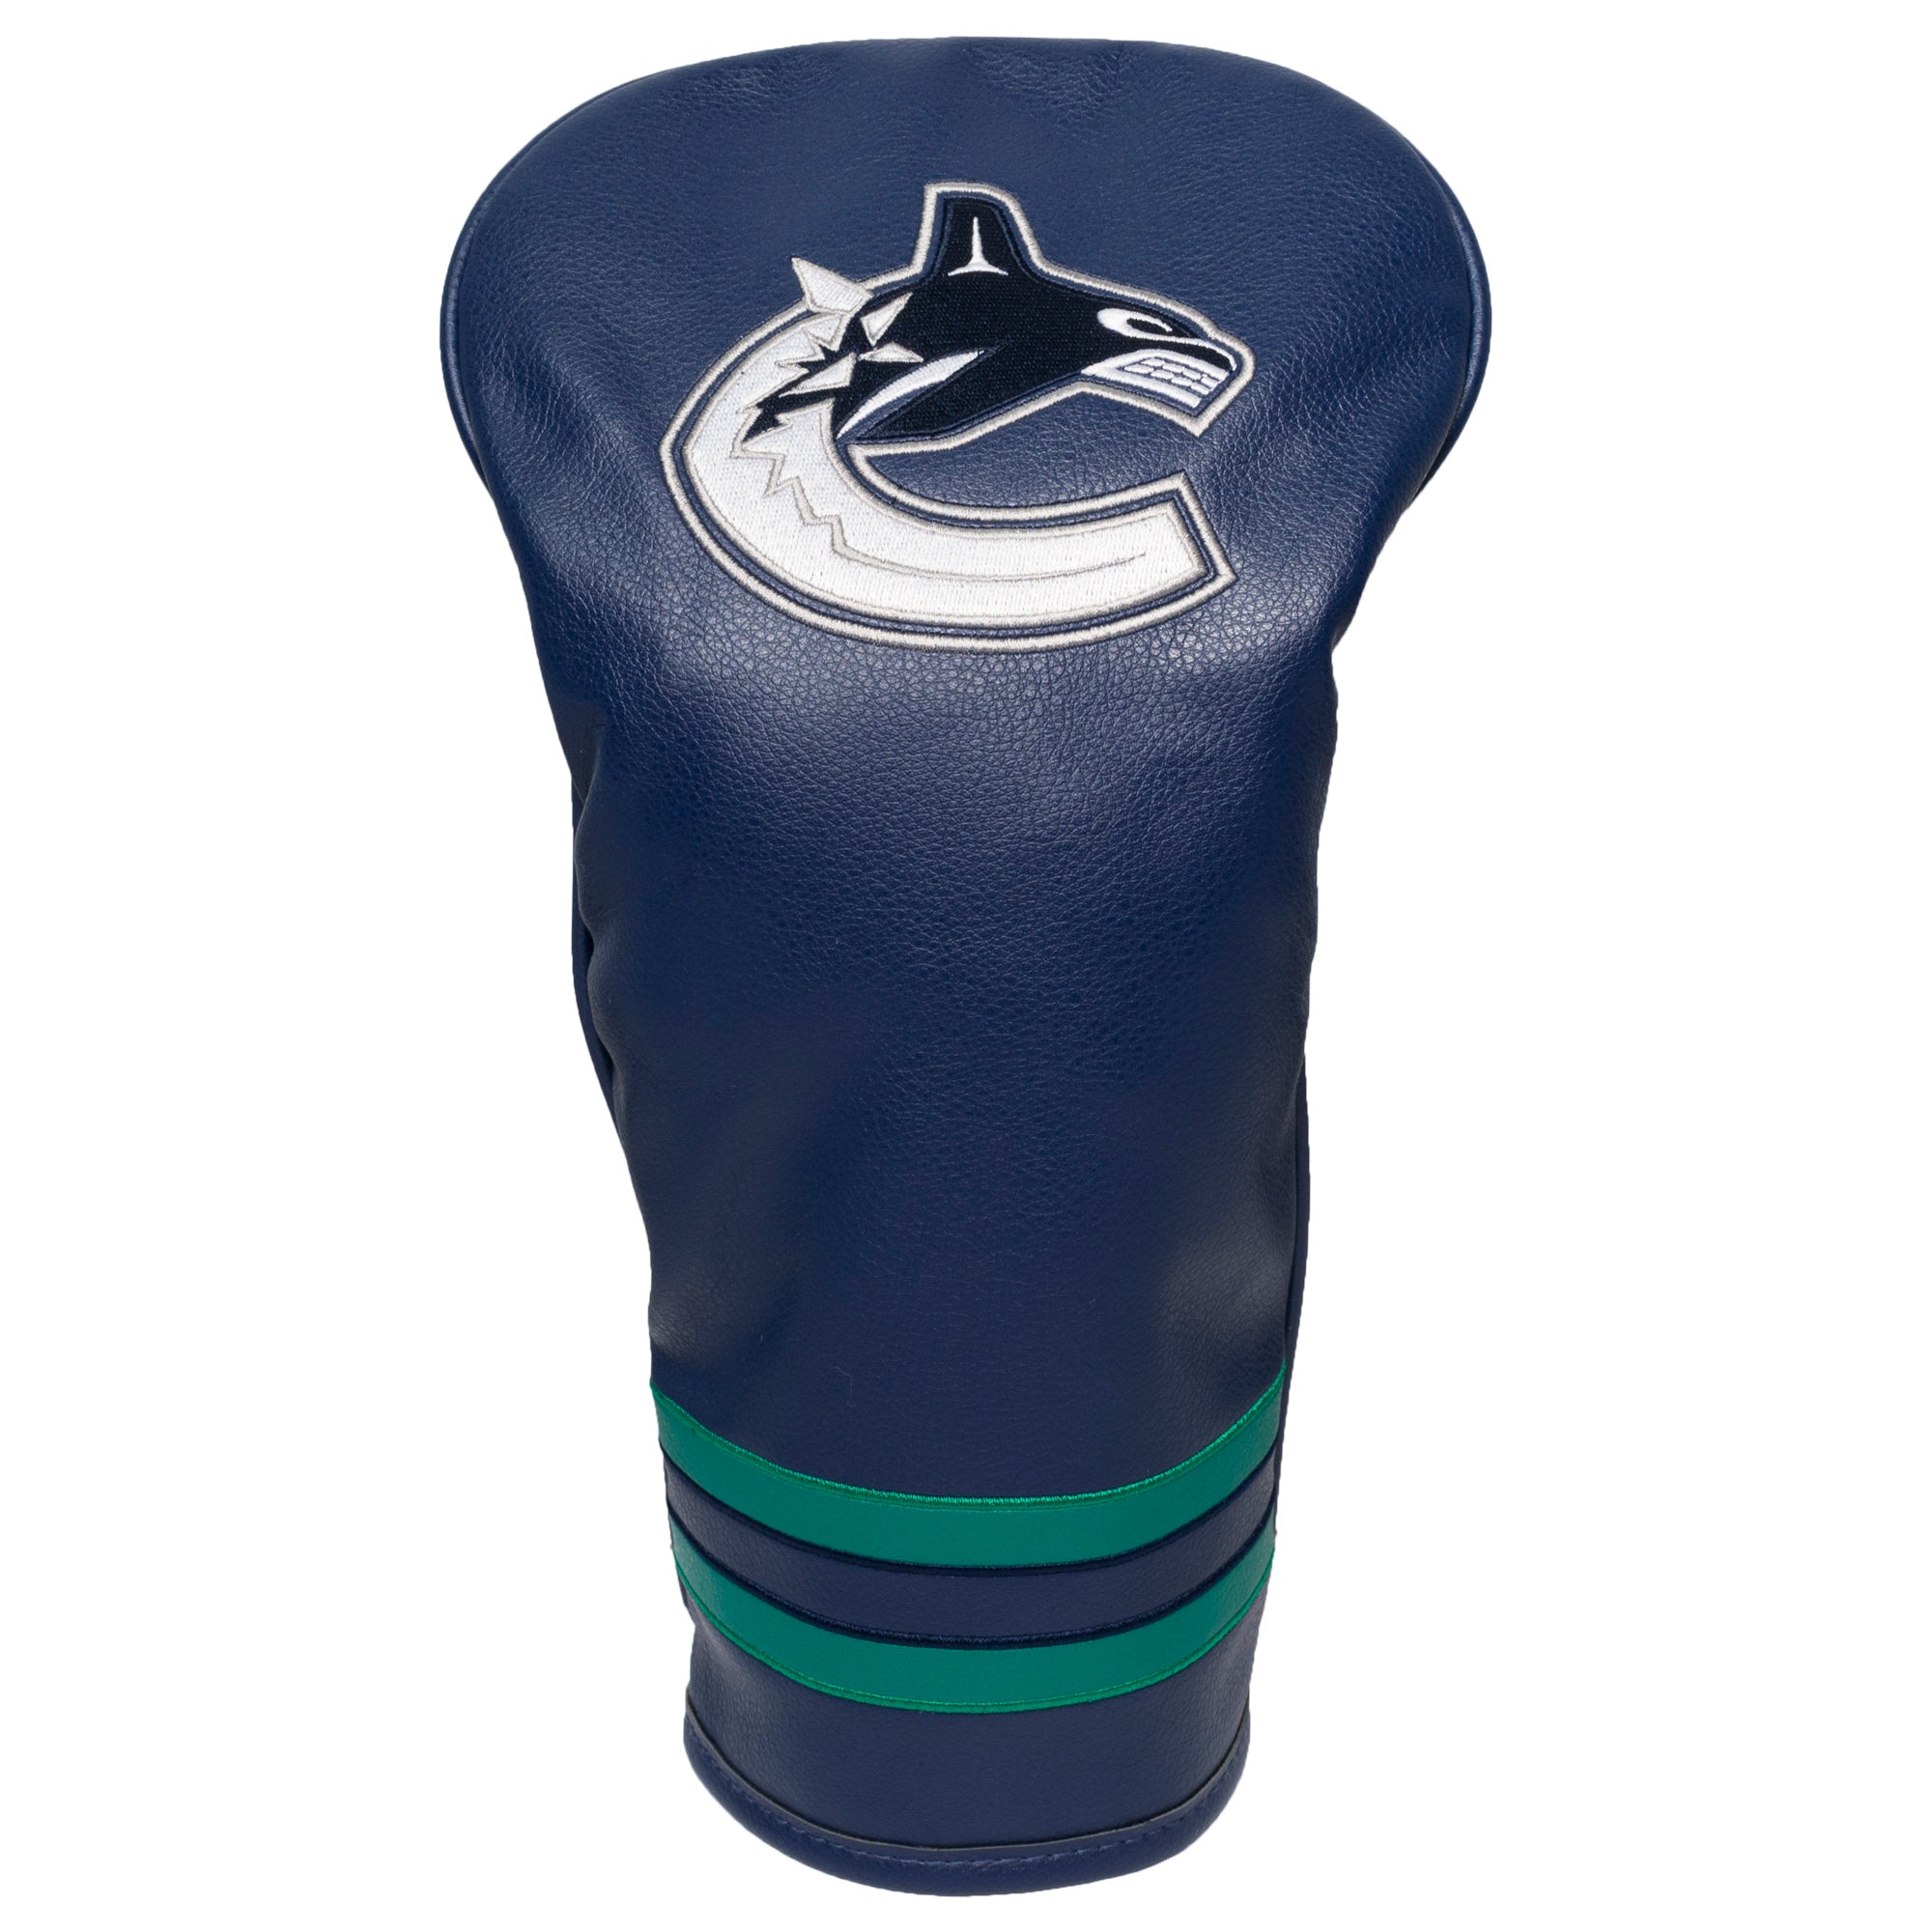 Vancouver Canucks Vintage Driver Headcover